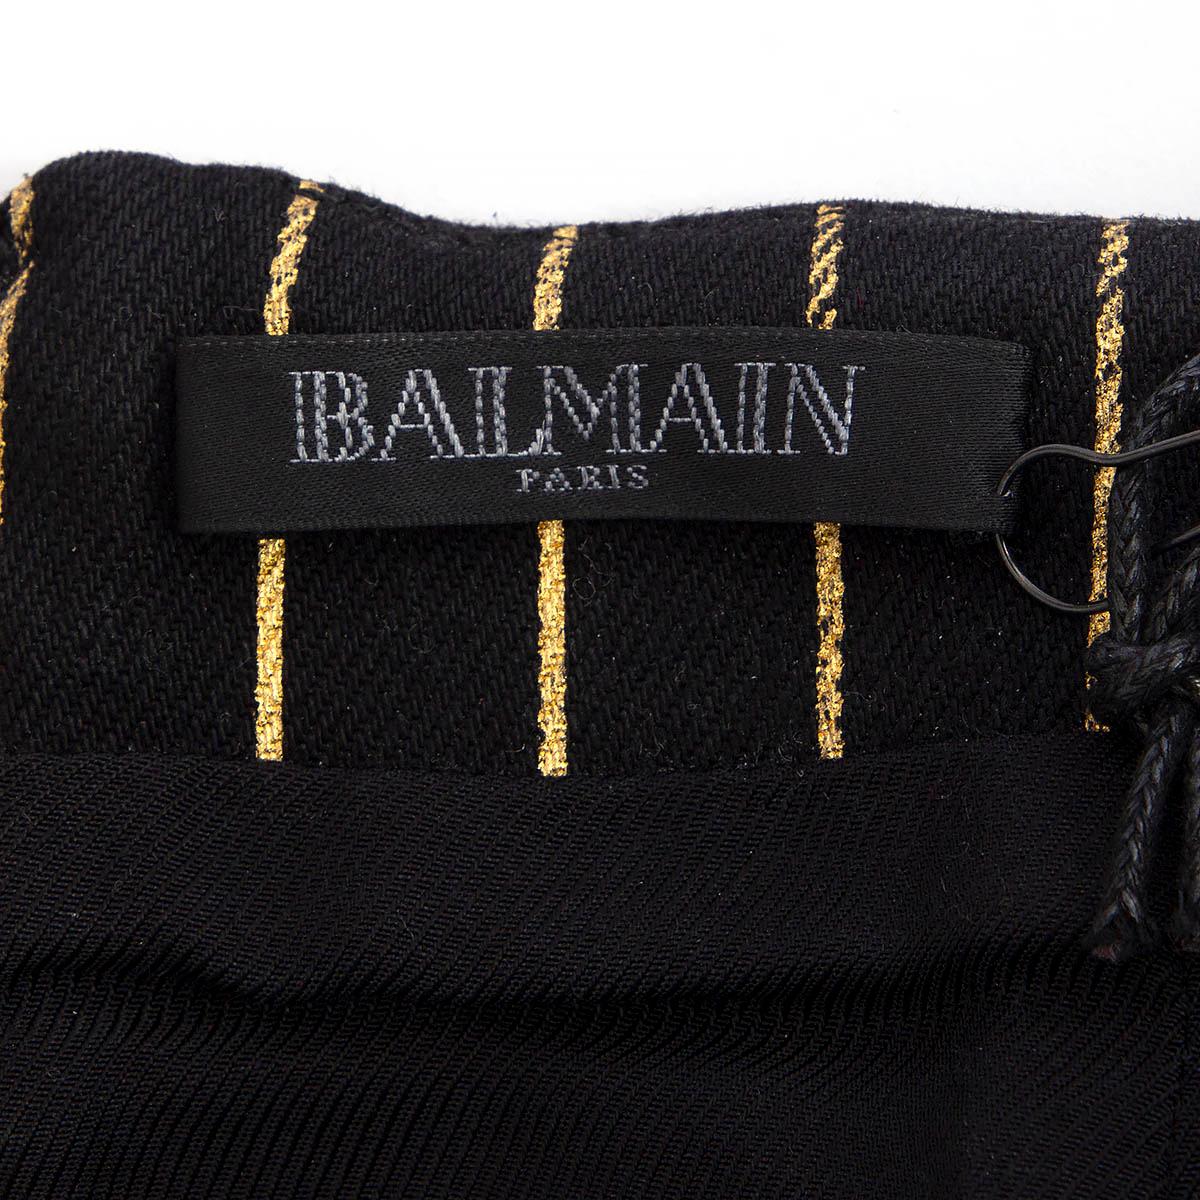 BALMAIN black & gold STRIPED BUTTONED HIGH WAISTED MINI Skirt 36 XS For Sale 2